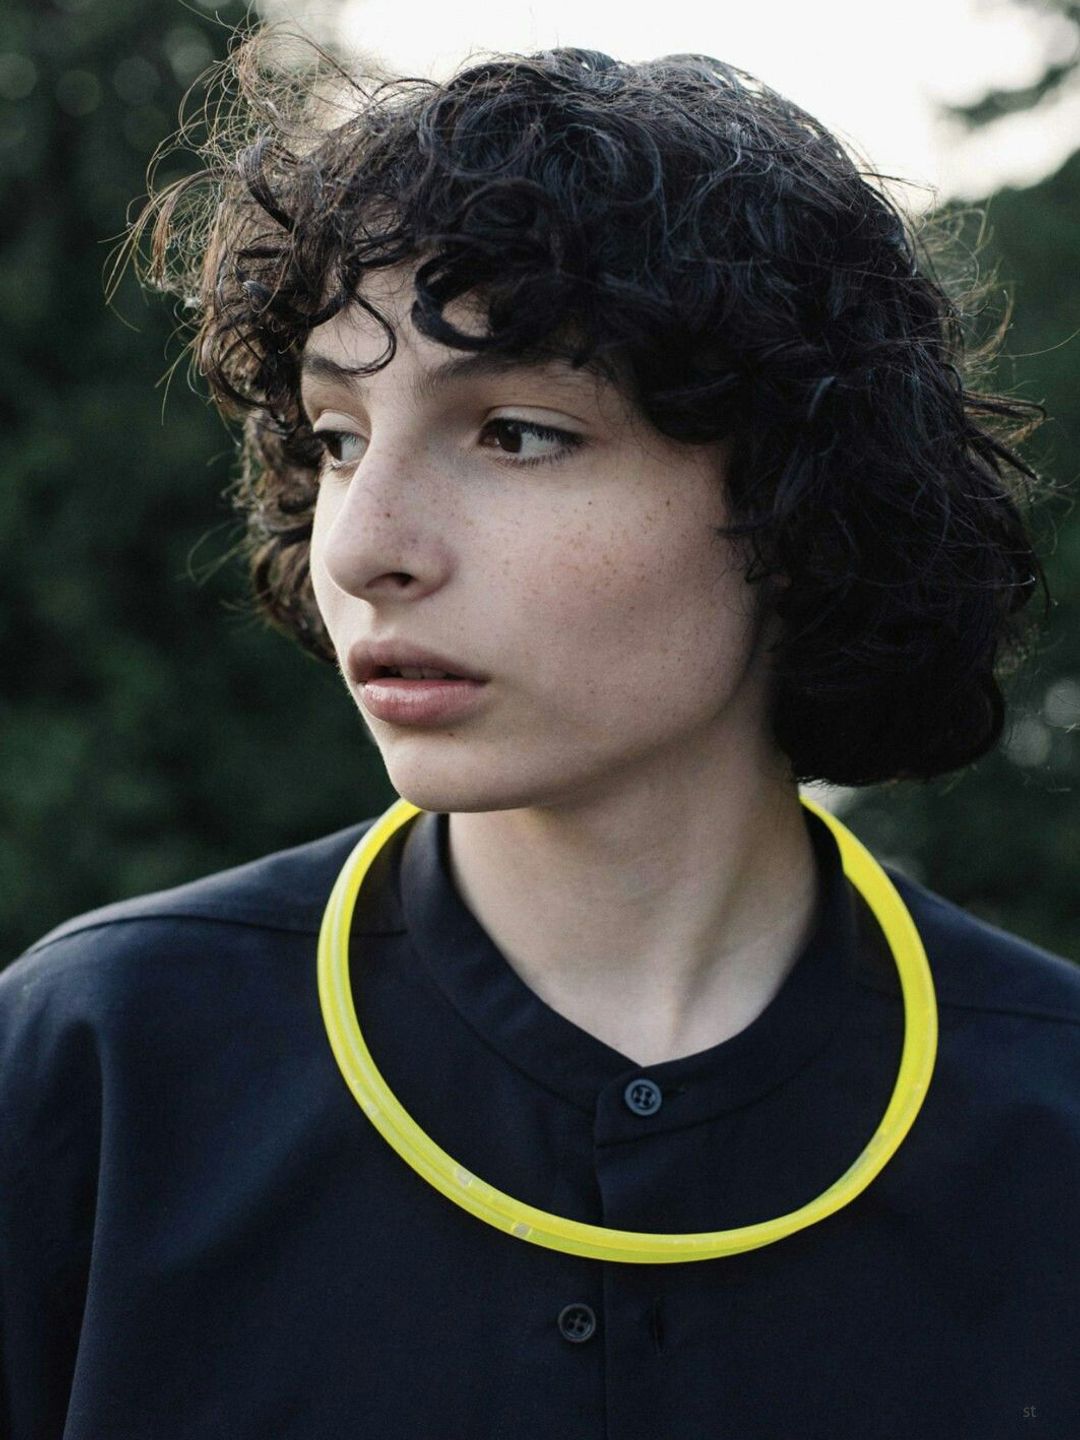 Finn Wolfhard how old is he